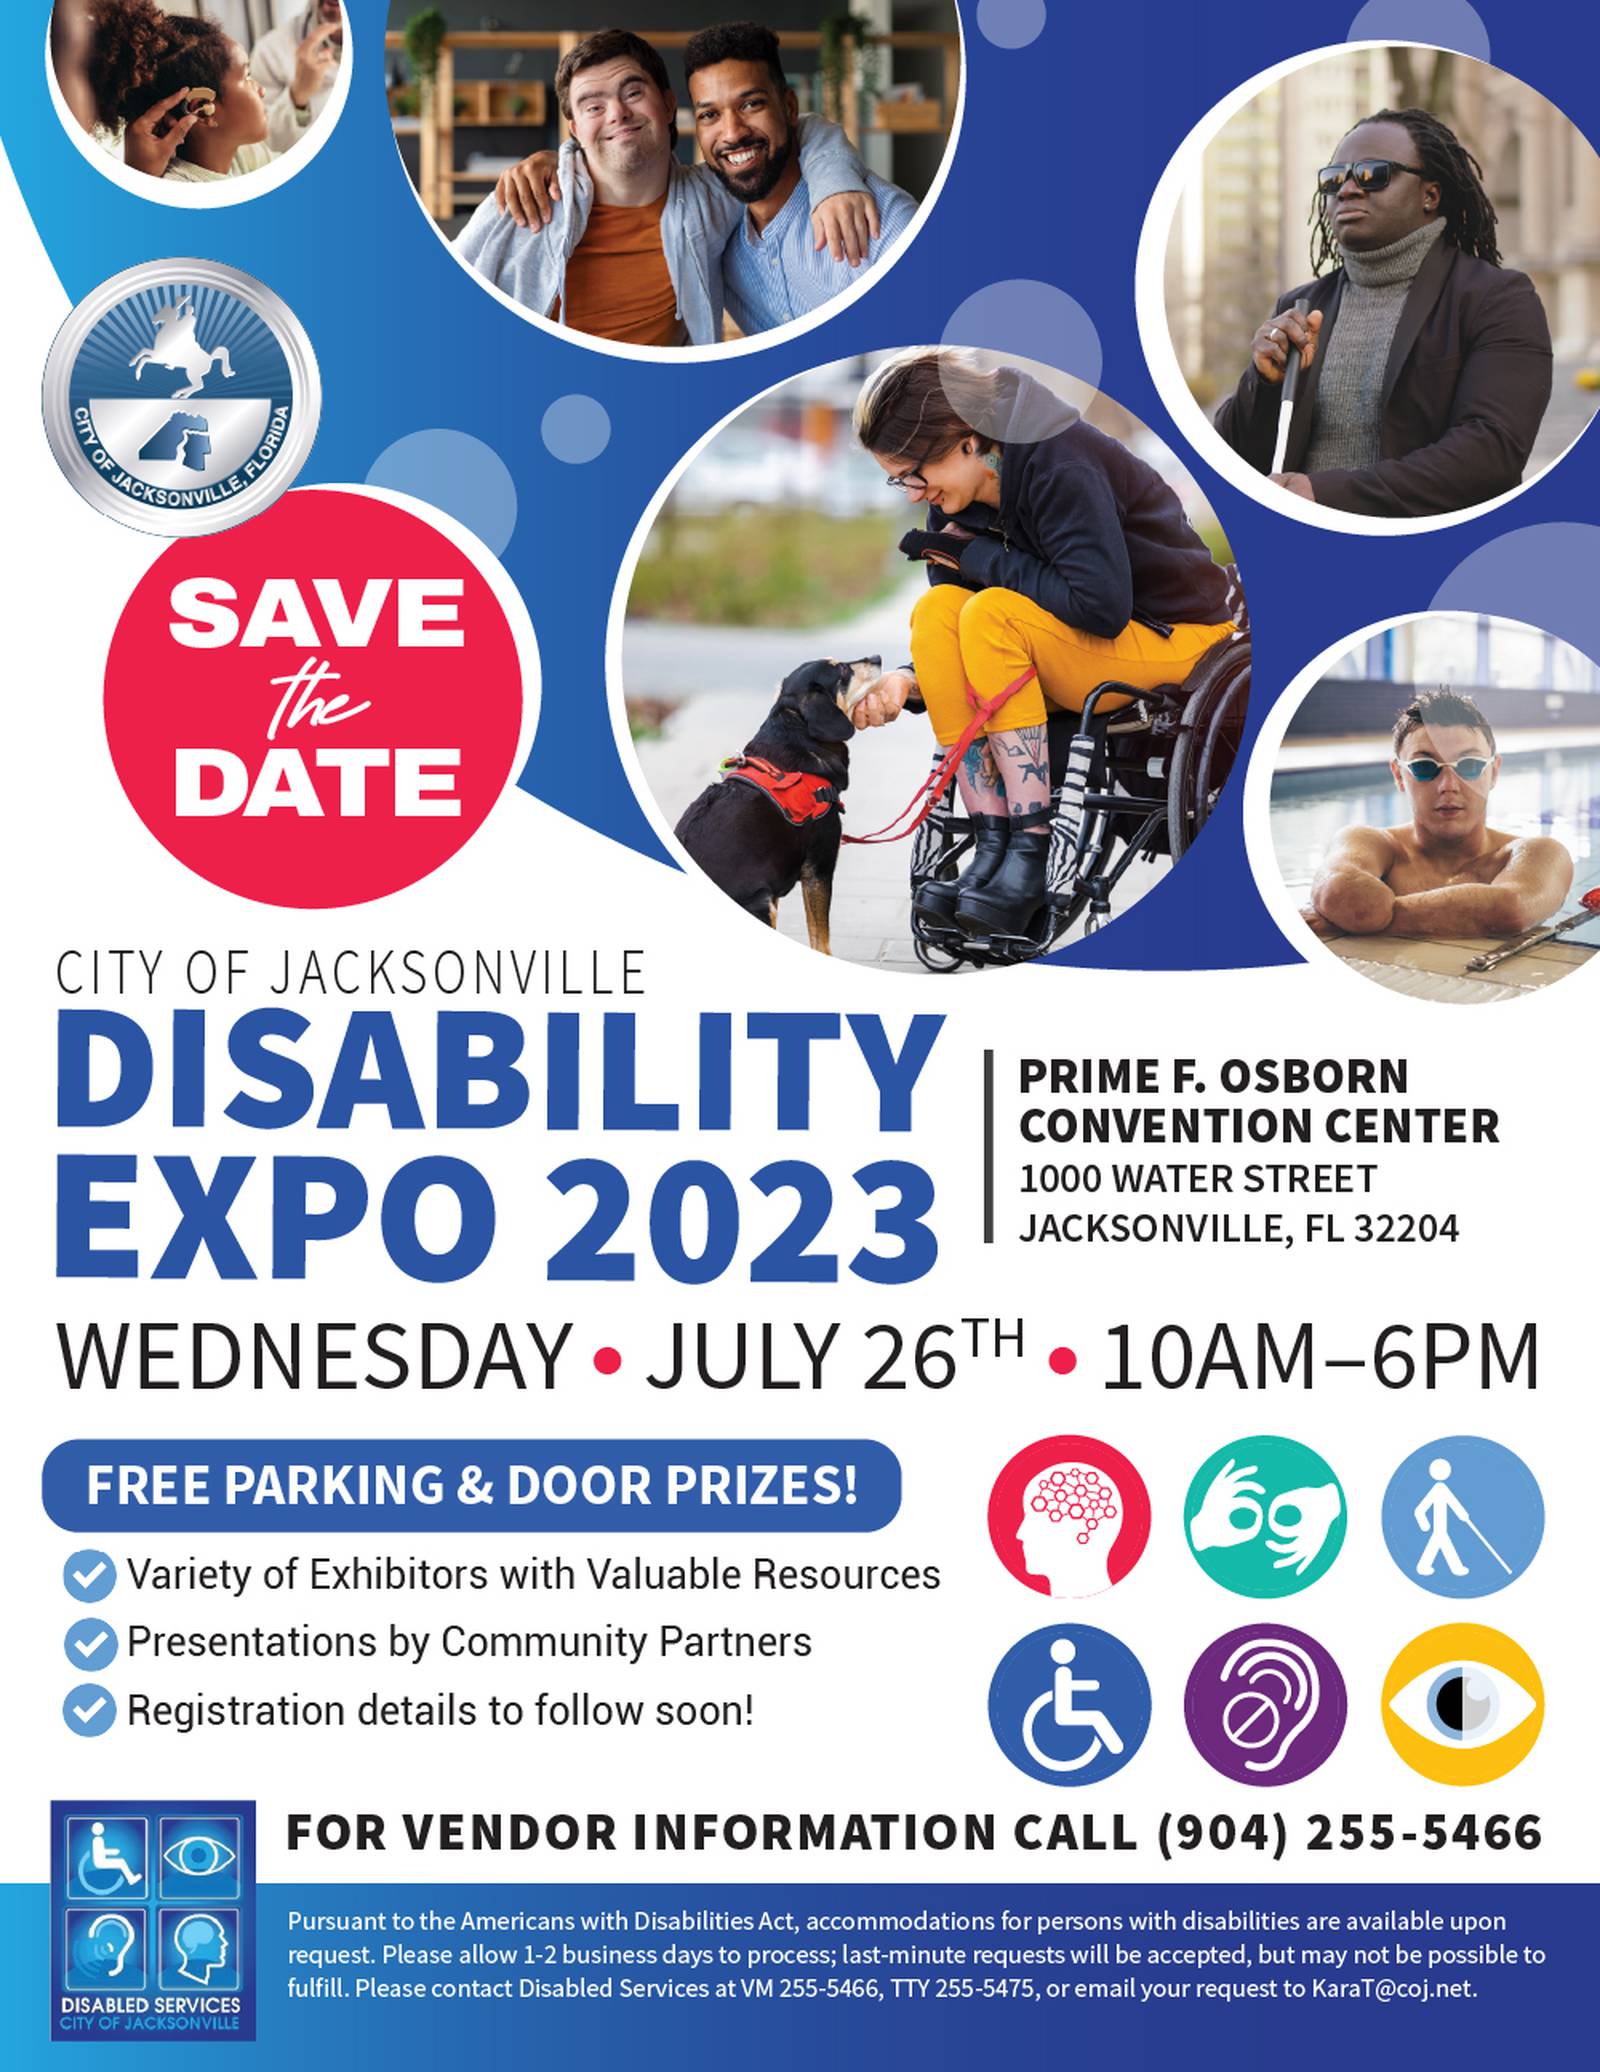 Jacksonville hosts expo to support people with disabilities July 26